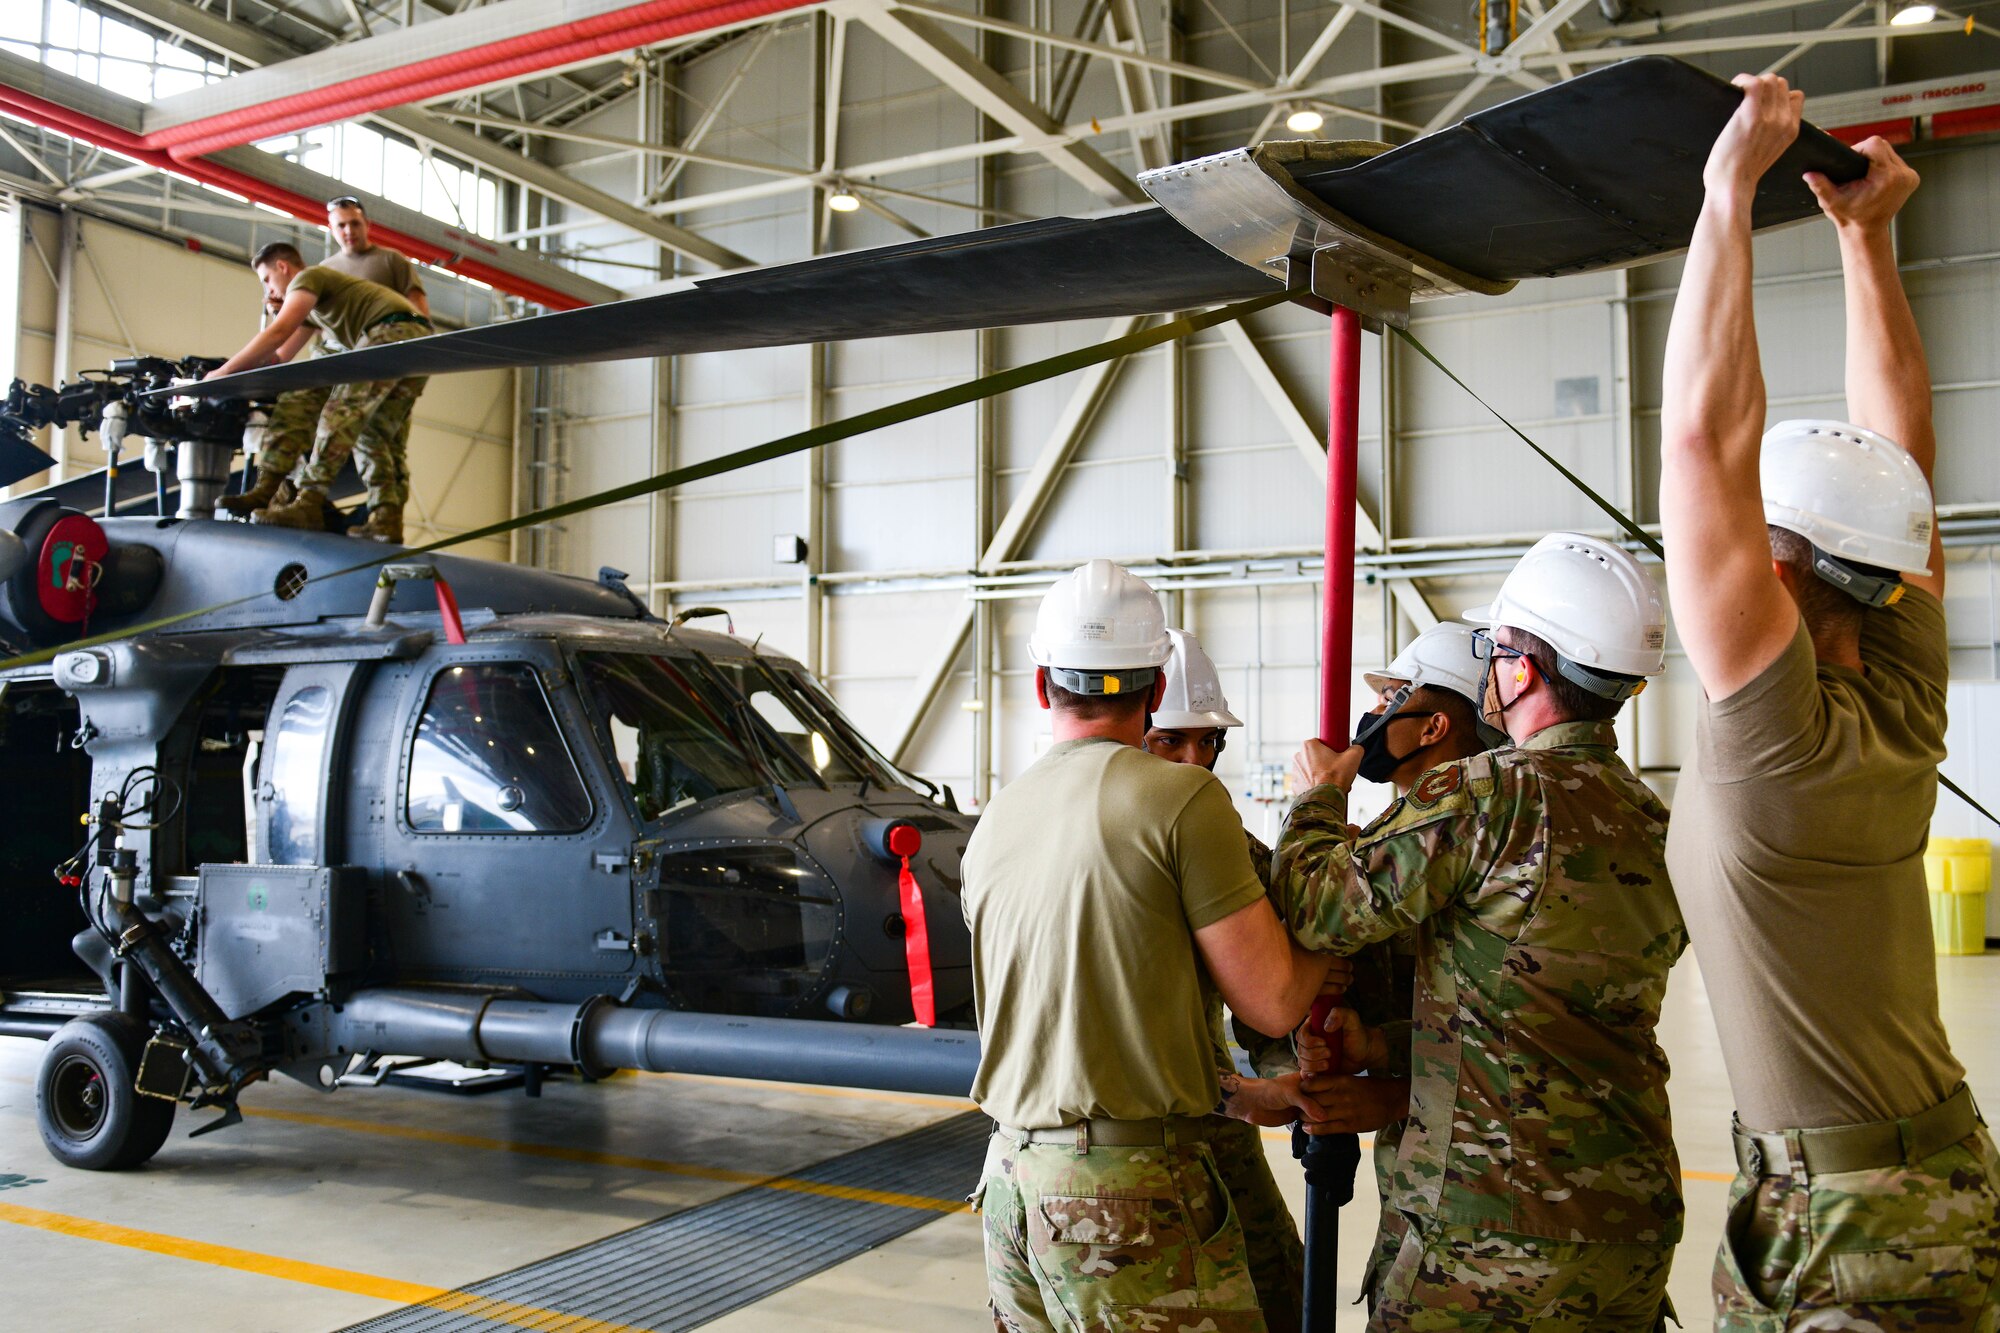 U.S. Air Force Airmen assigned to the 56th Helicopter Maintenance Unit compete in the 3rd quarter Rapid Aircraft Generation and Employment (RAGE) event at Aviano Air Base, Italy, Oct. 7, 2021. During RAGE, the team completed an unfold of an HH-60G Pave Hawk helicopter while simultaneously installing one GAU-18 .50 caliber machine gun and one GAU-1 minigun in a coordinated effort. (U.S. Air Force photo by Senior Airman Brooke Moeder)